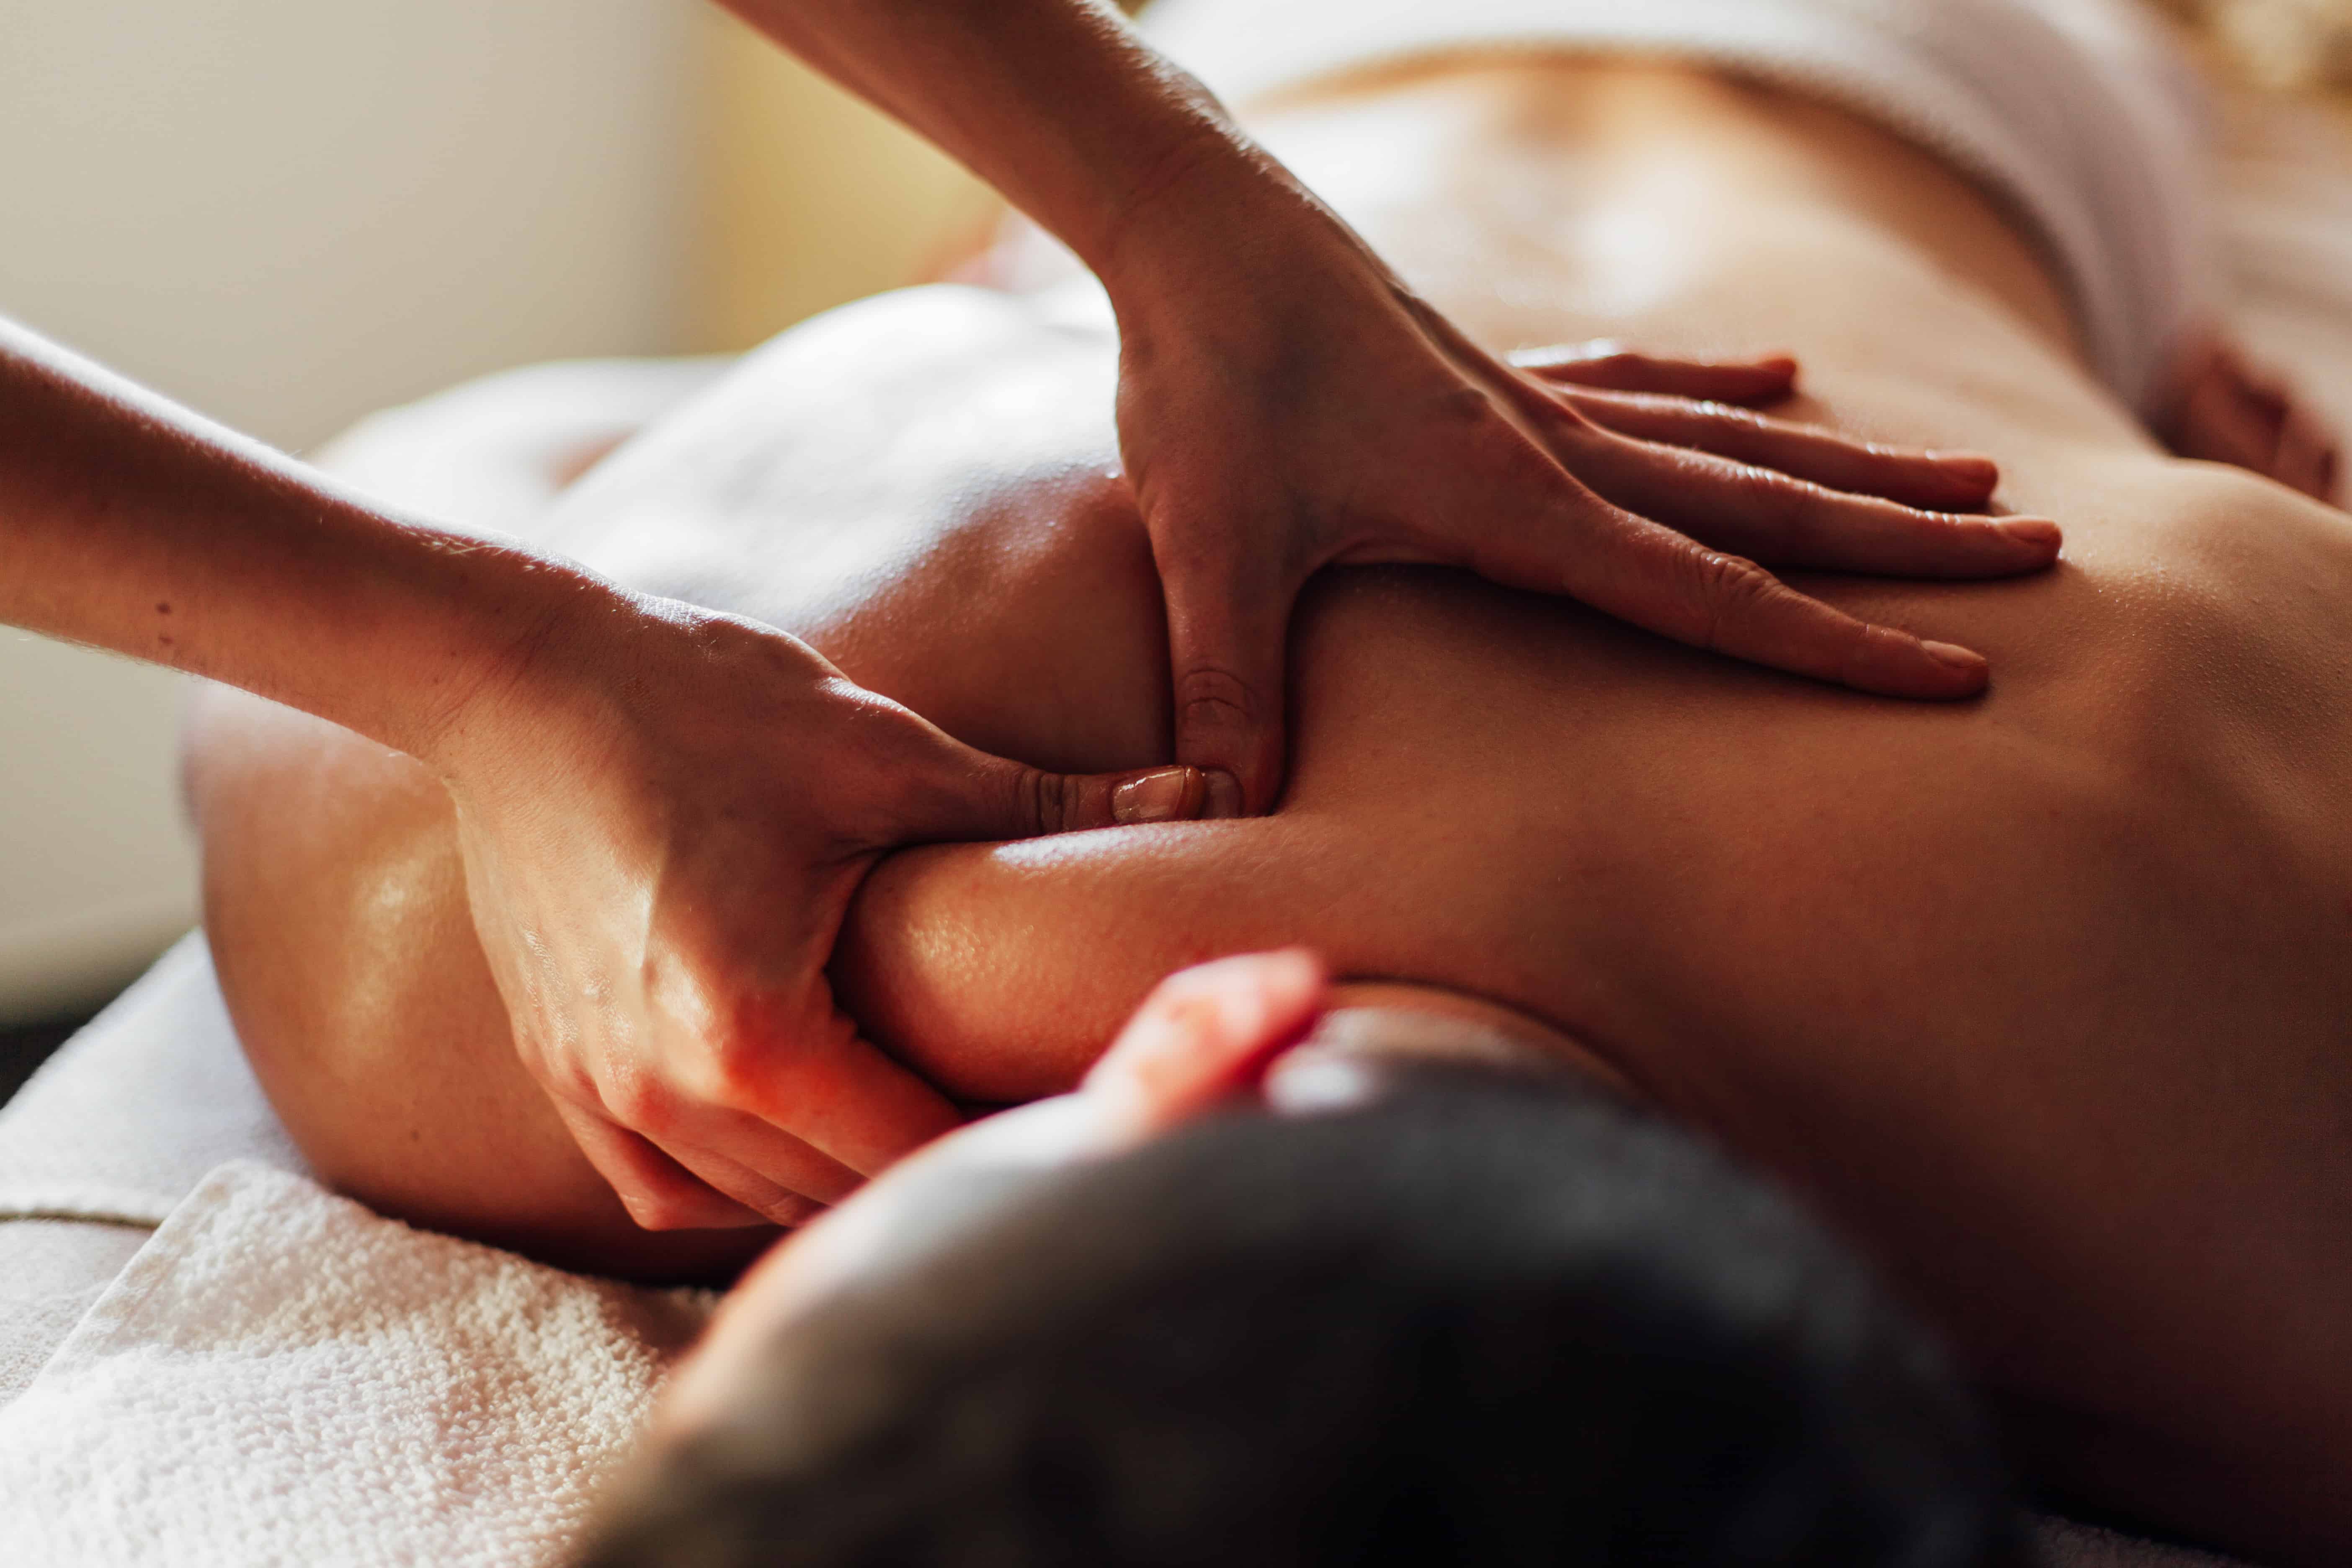 How An Erotic Massage Can Help Relieve Stress